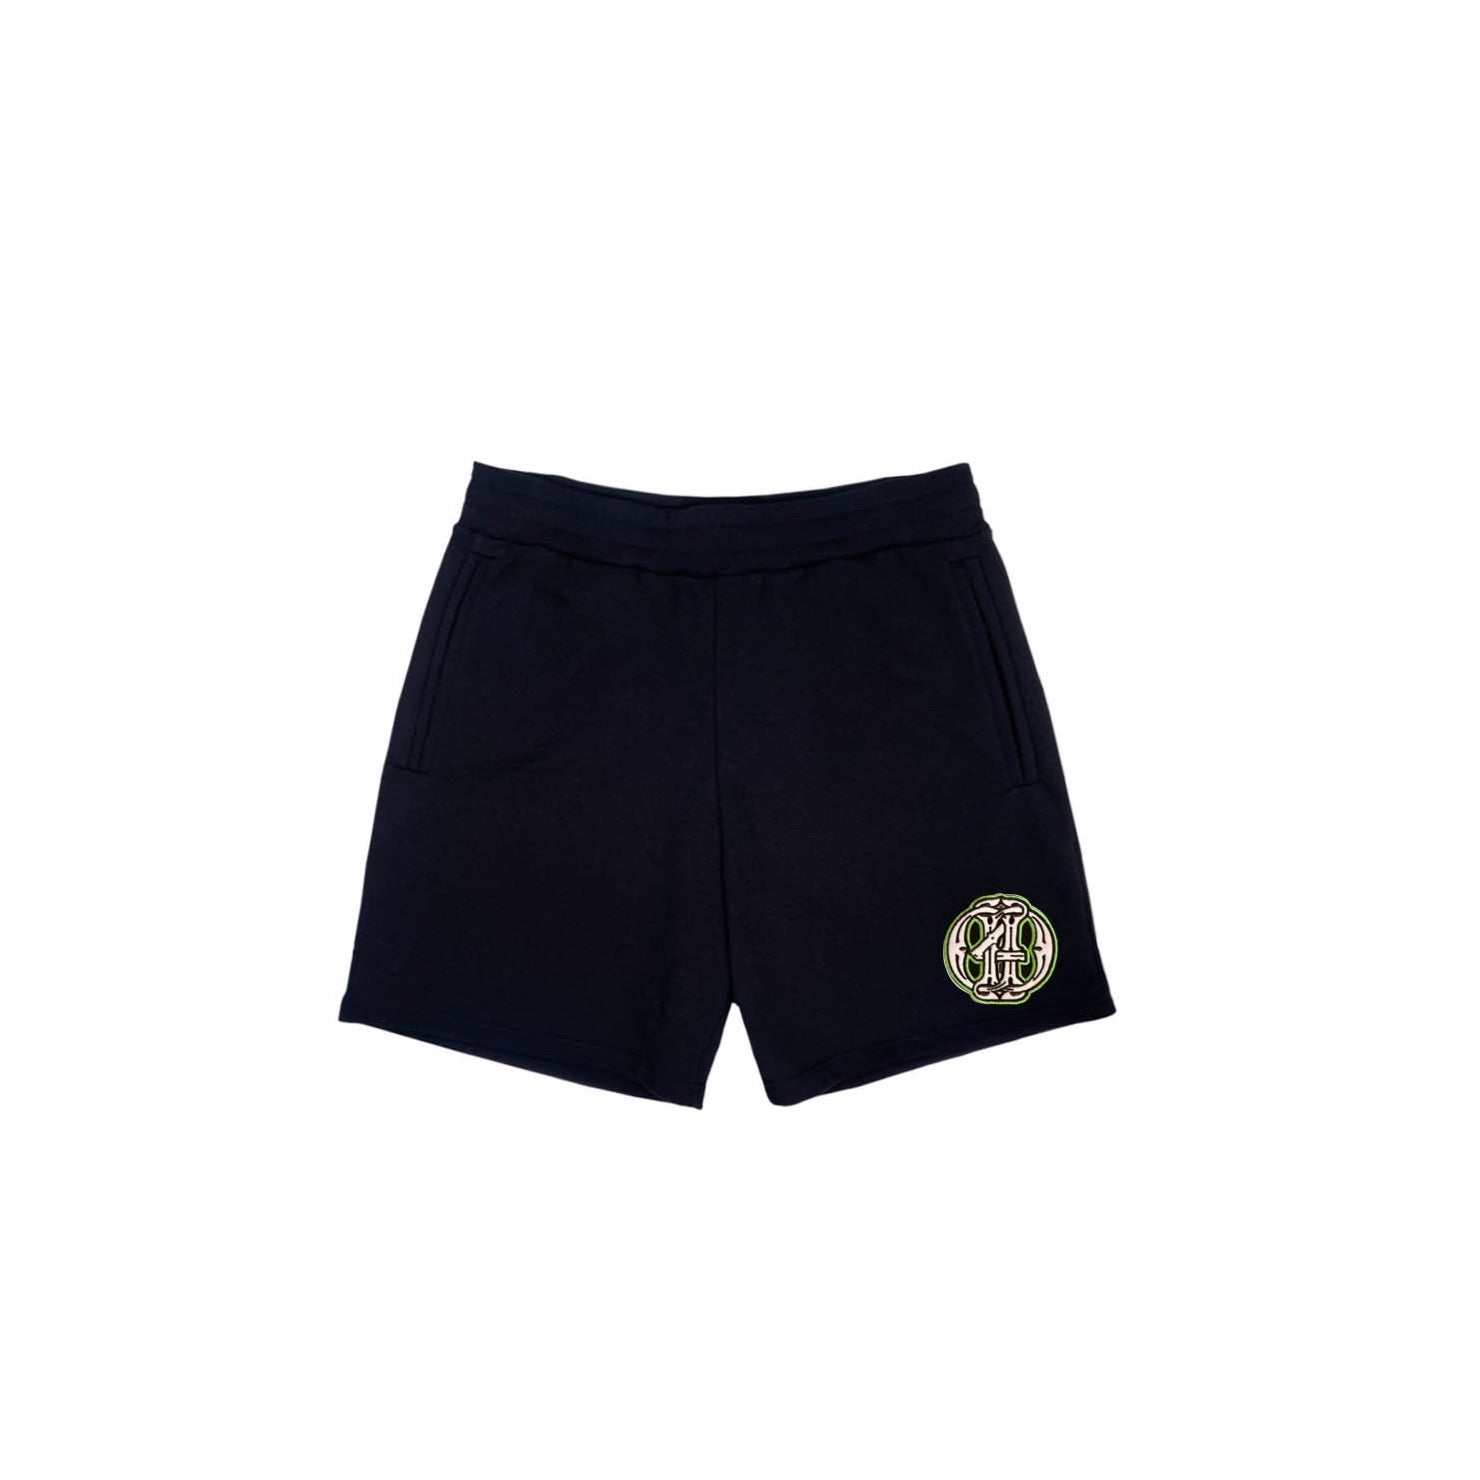 Monogram French Terry Lux Black Shorts - Death4Dollars